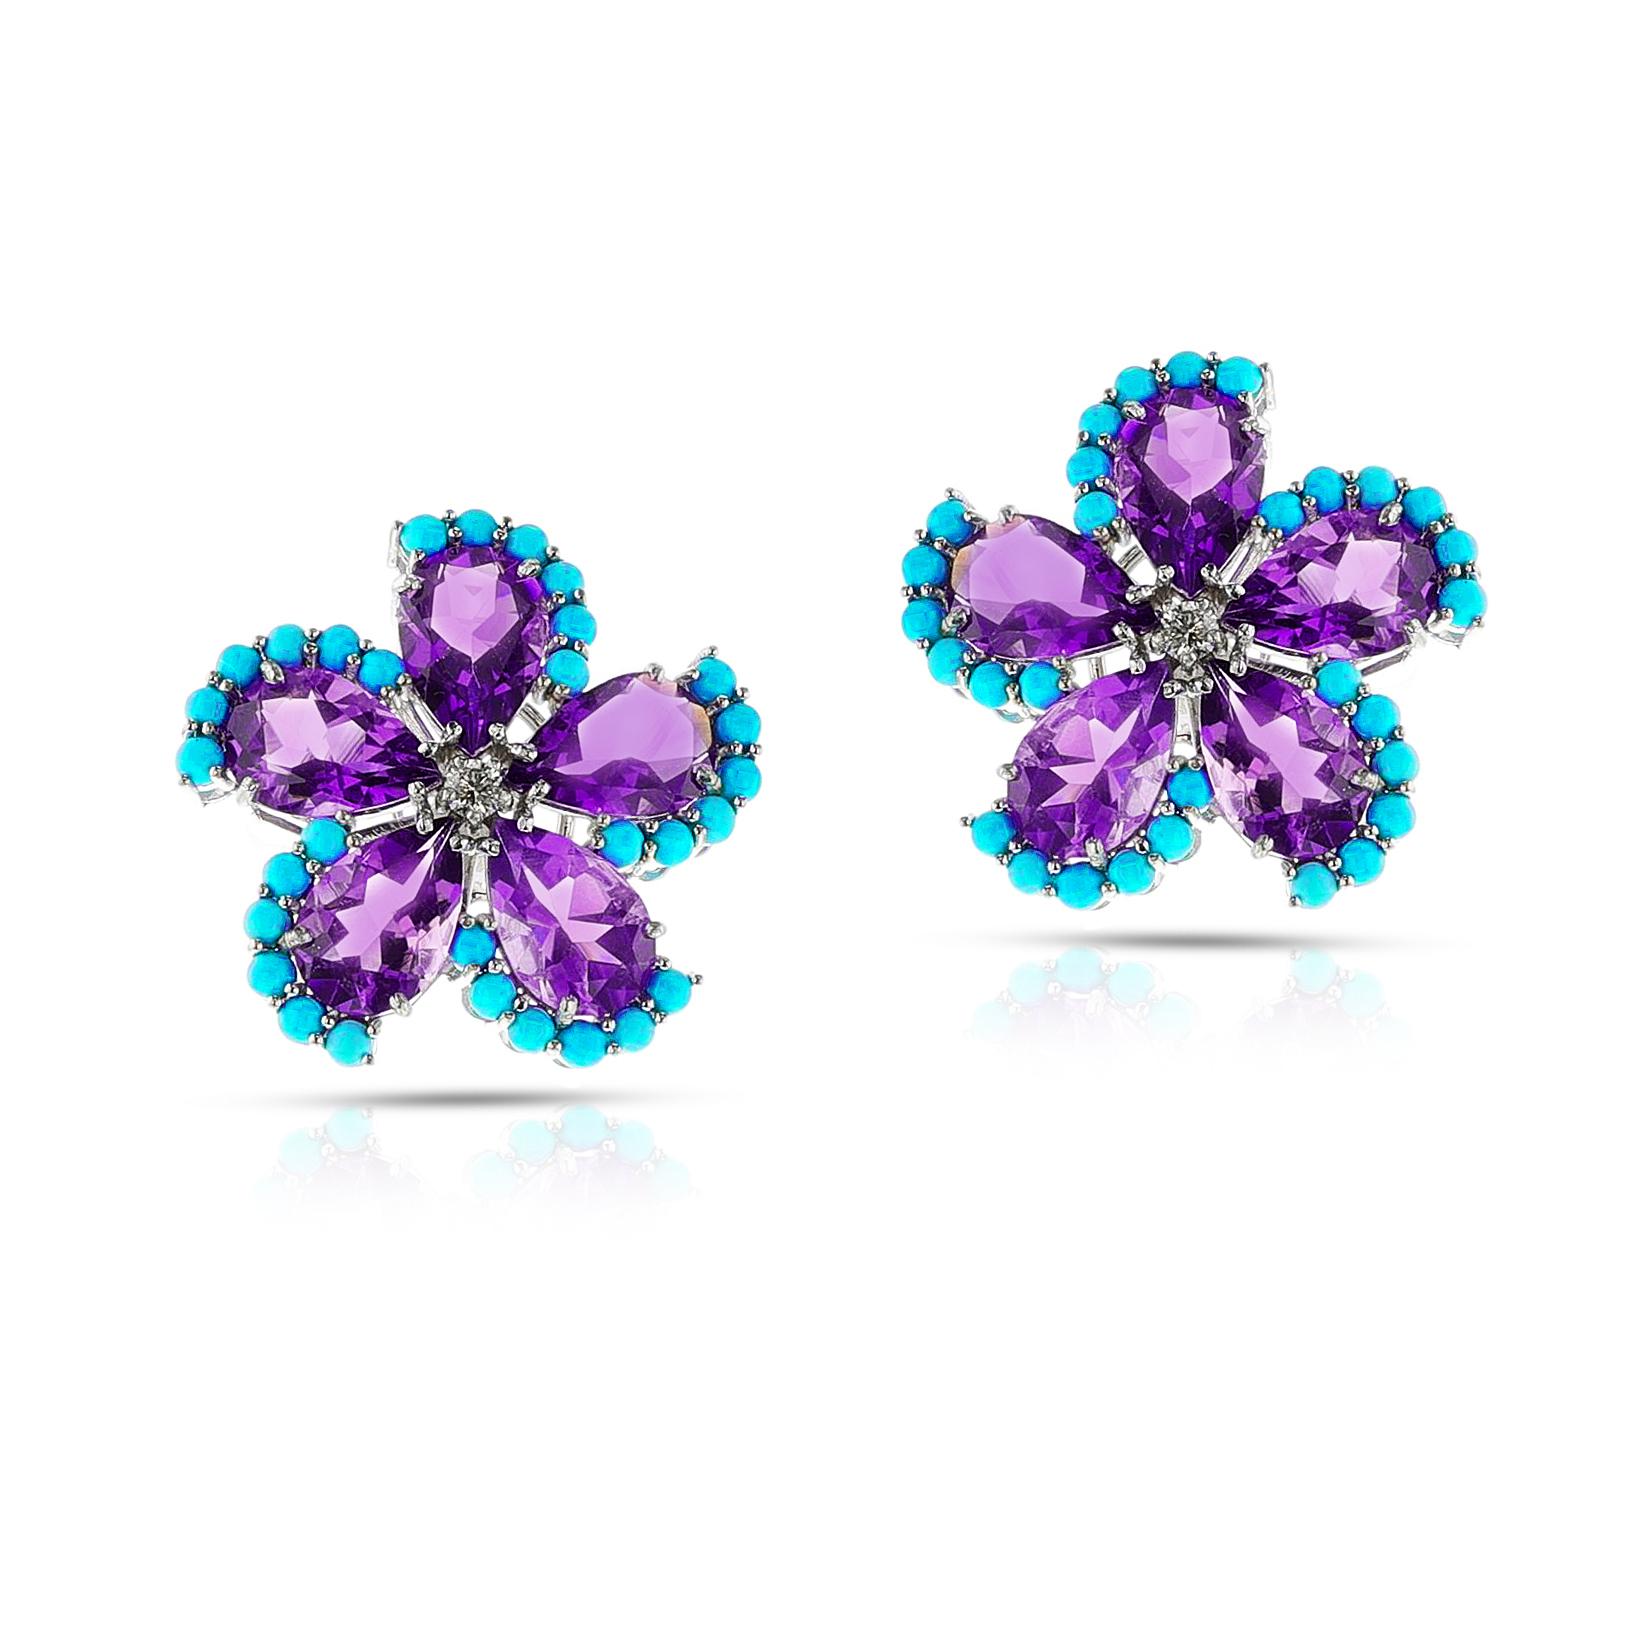 Pear Cut Amethyst, Turquoise Cabochon, and Diamond Floral Earrings, 18k For Sale